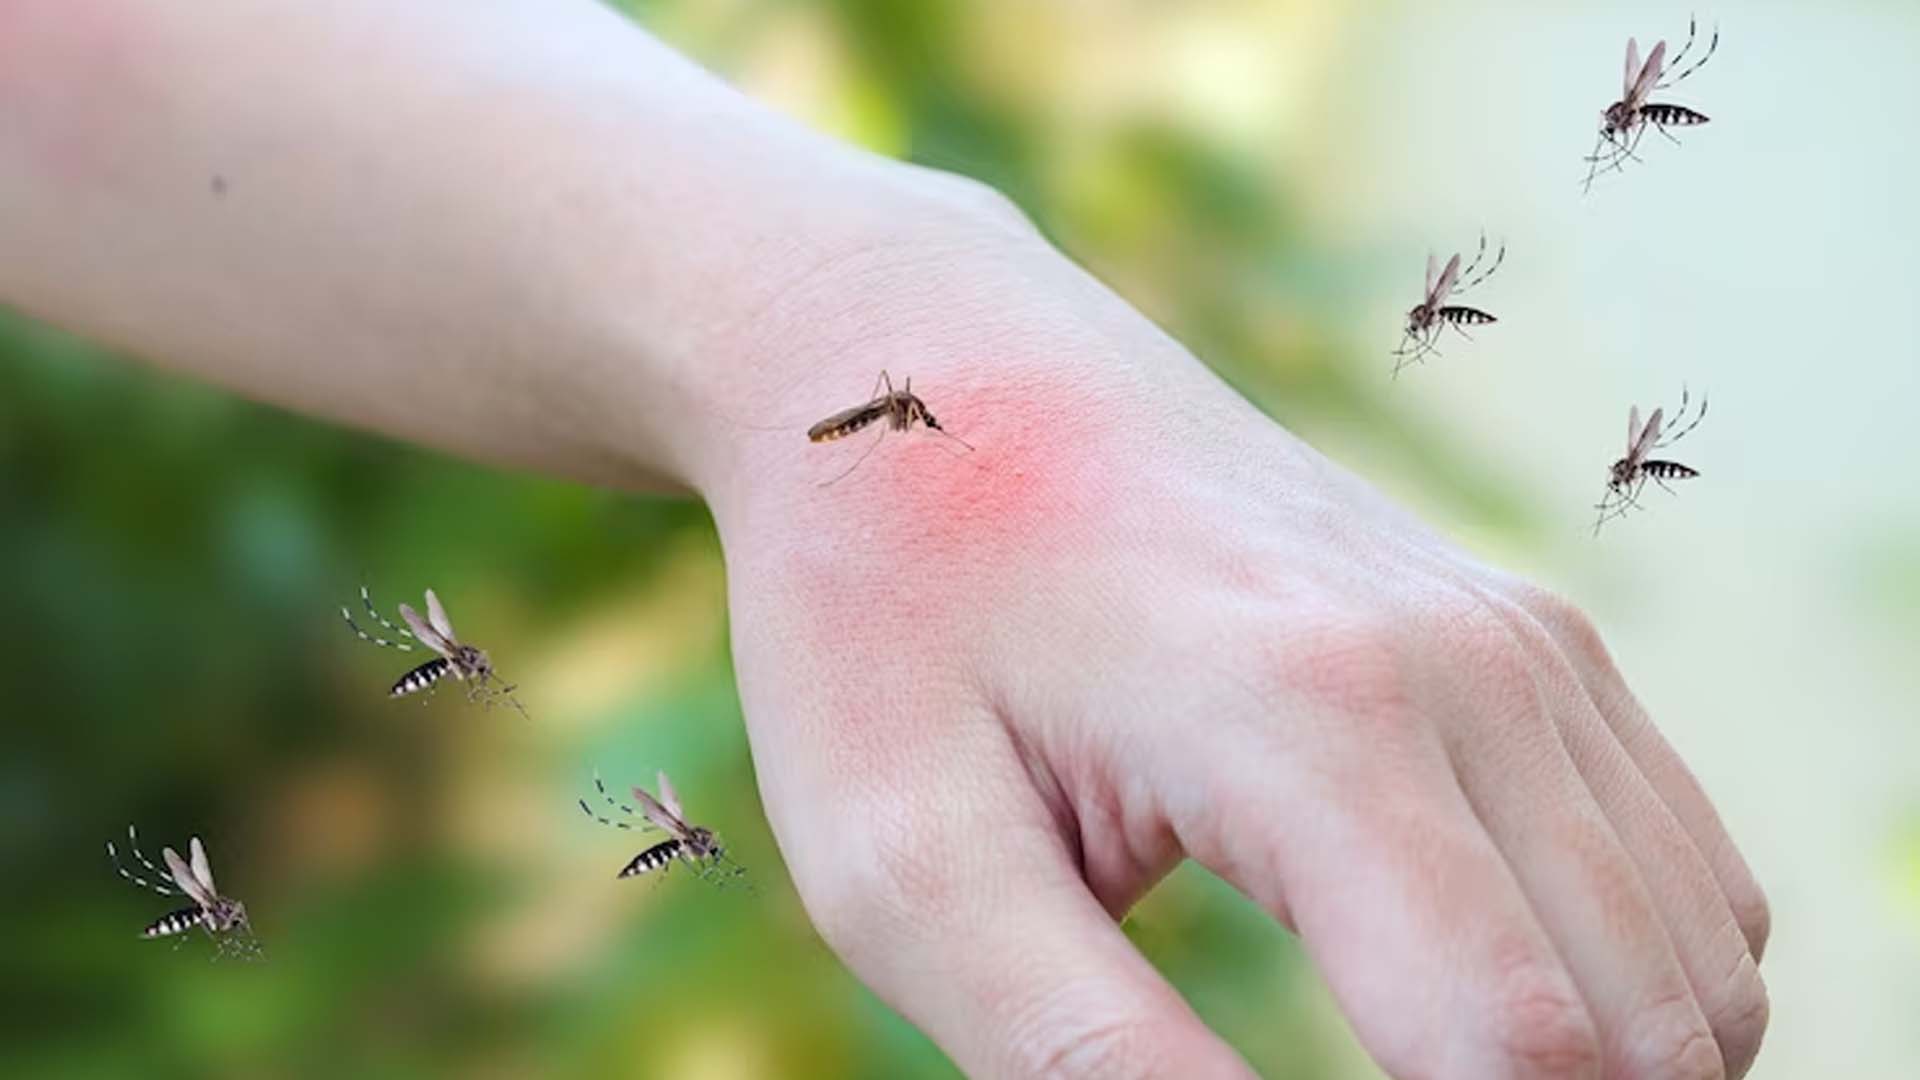 What Other Diseases Can be Caused by Mosquito Bites?